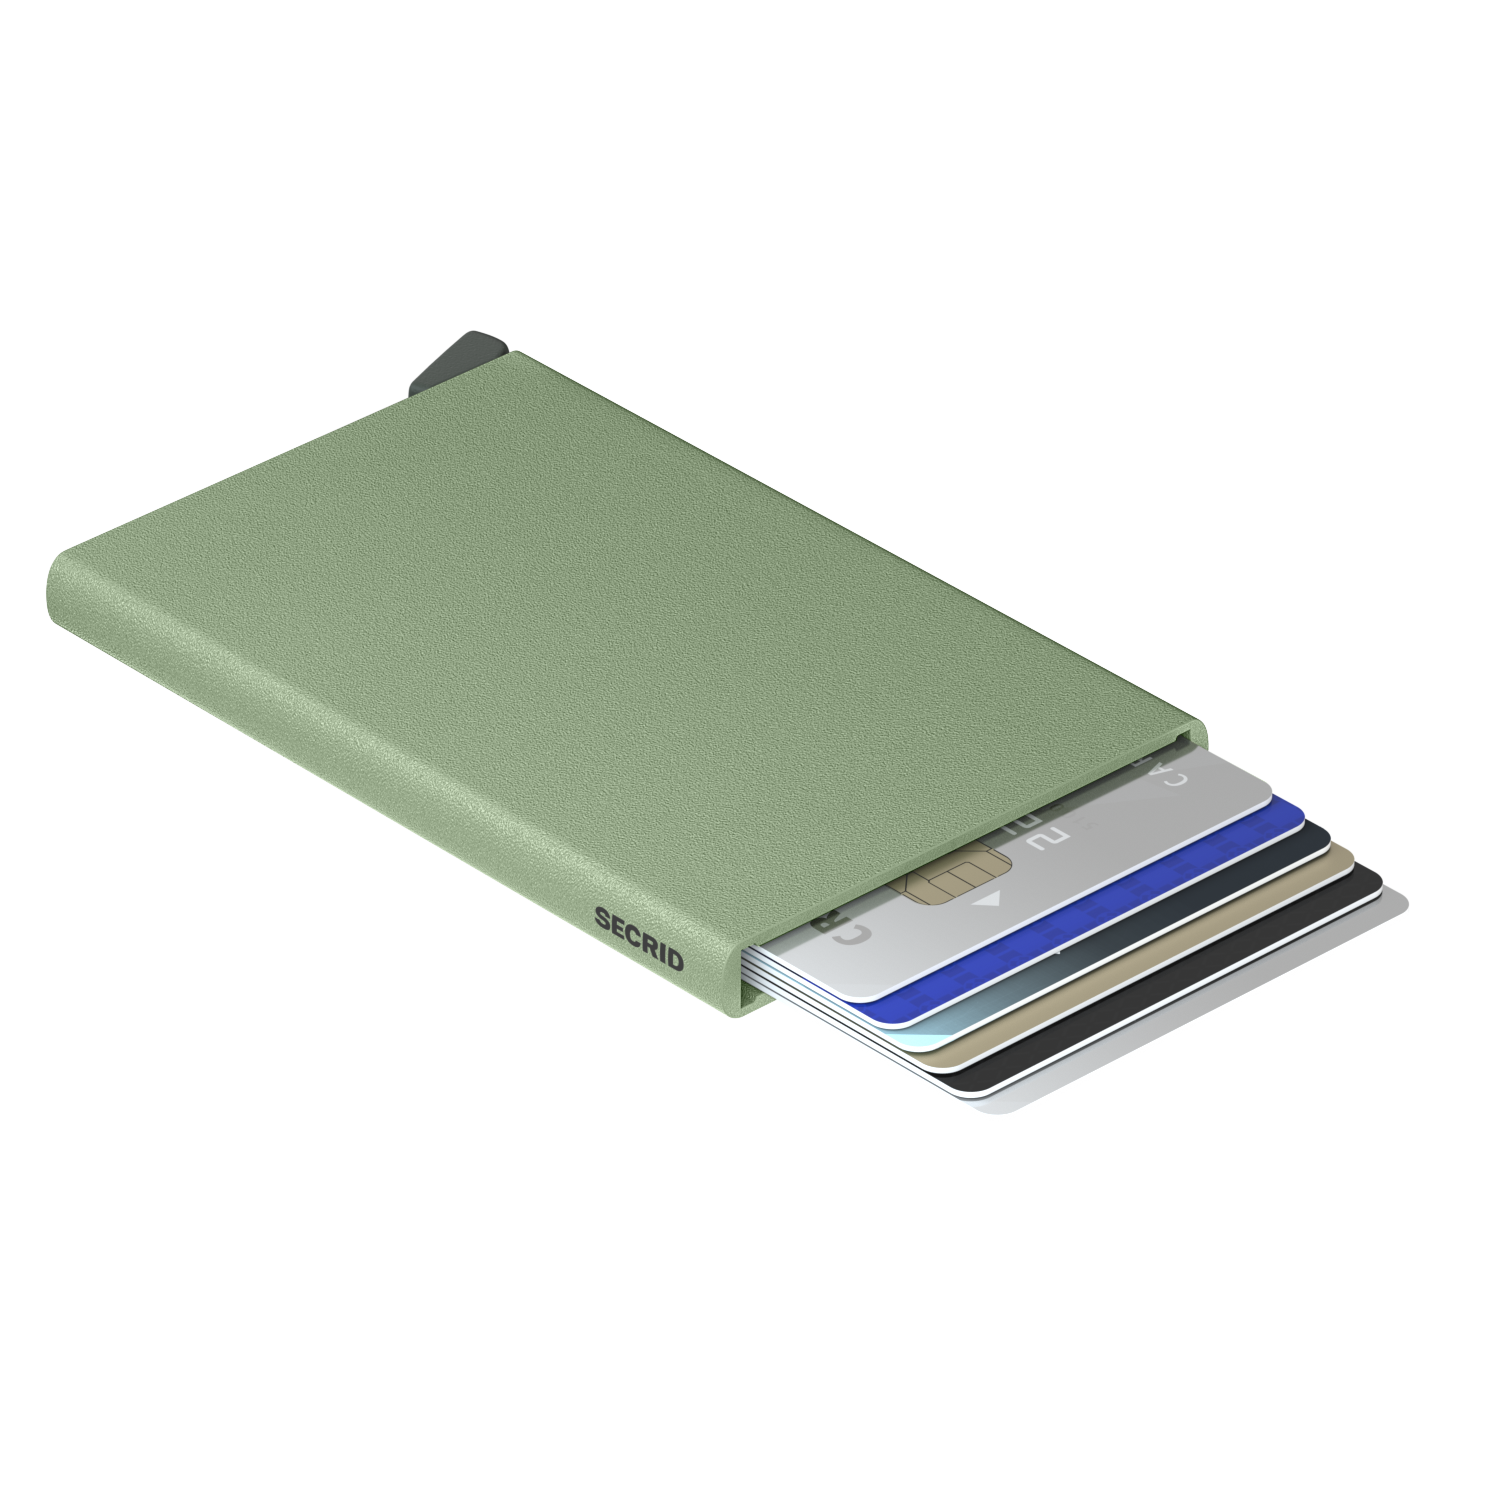 Cardprotector in Powder Coated Pistachio | by Secrid Wallets - Lifestory